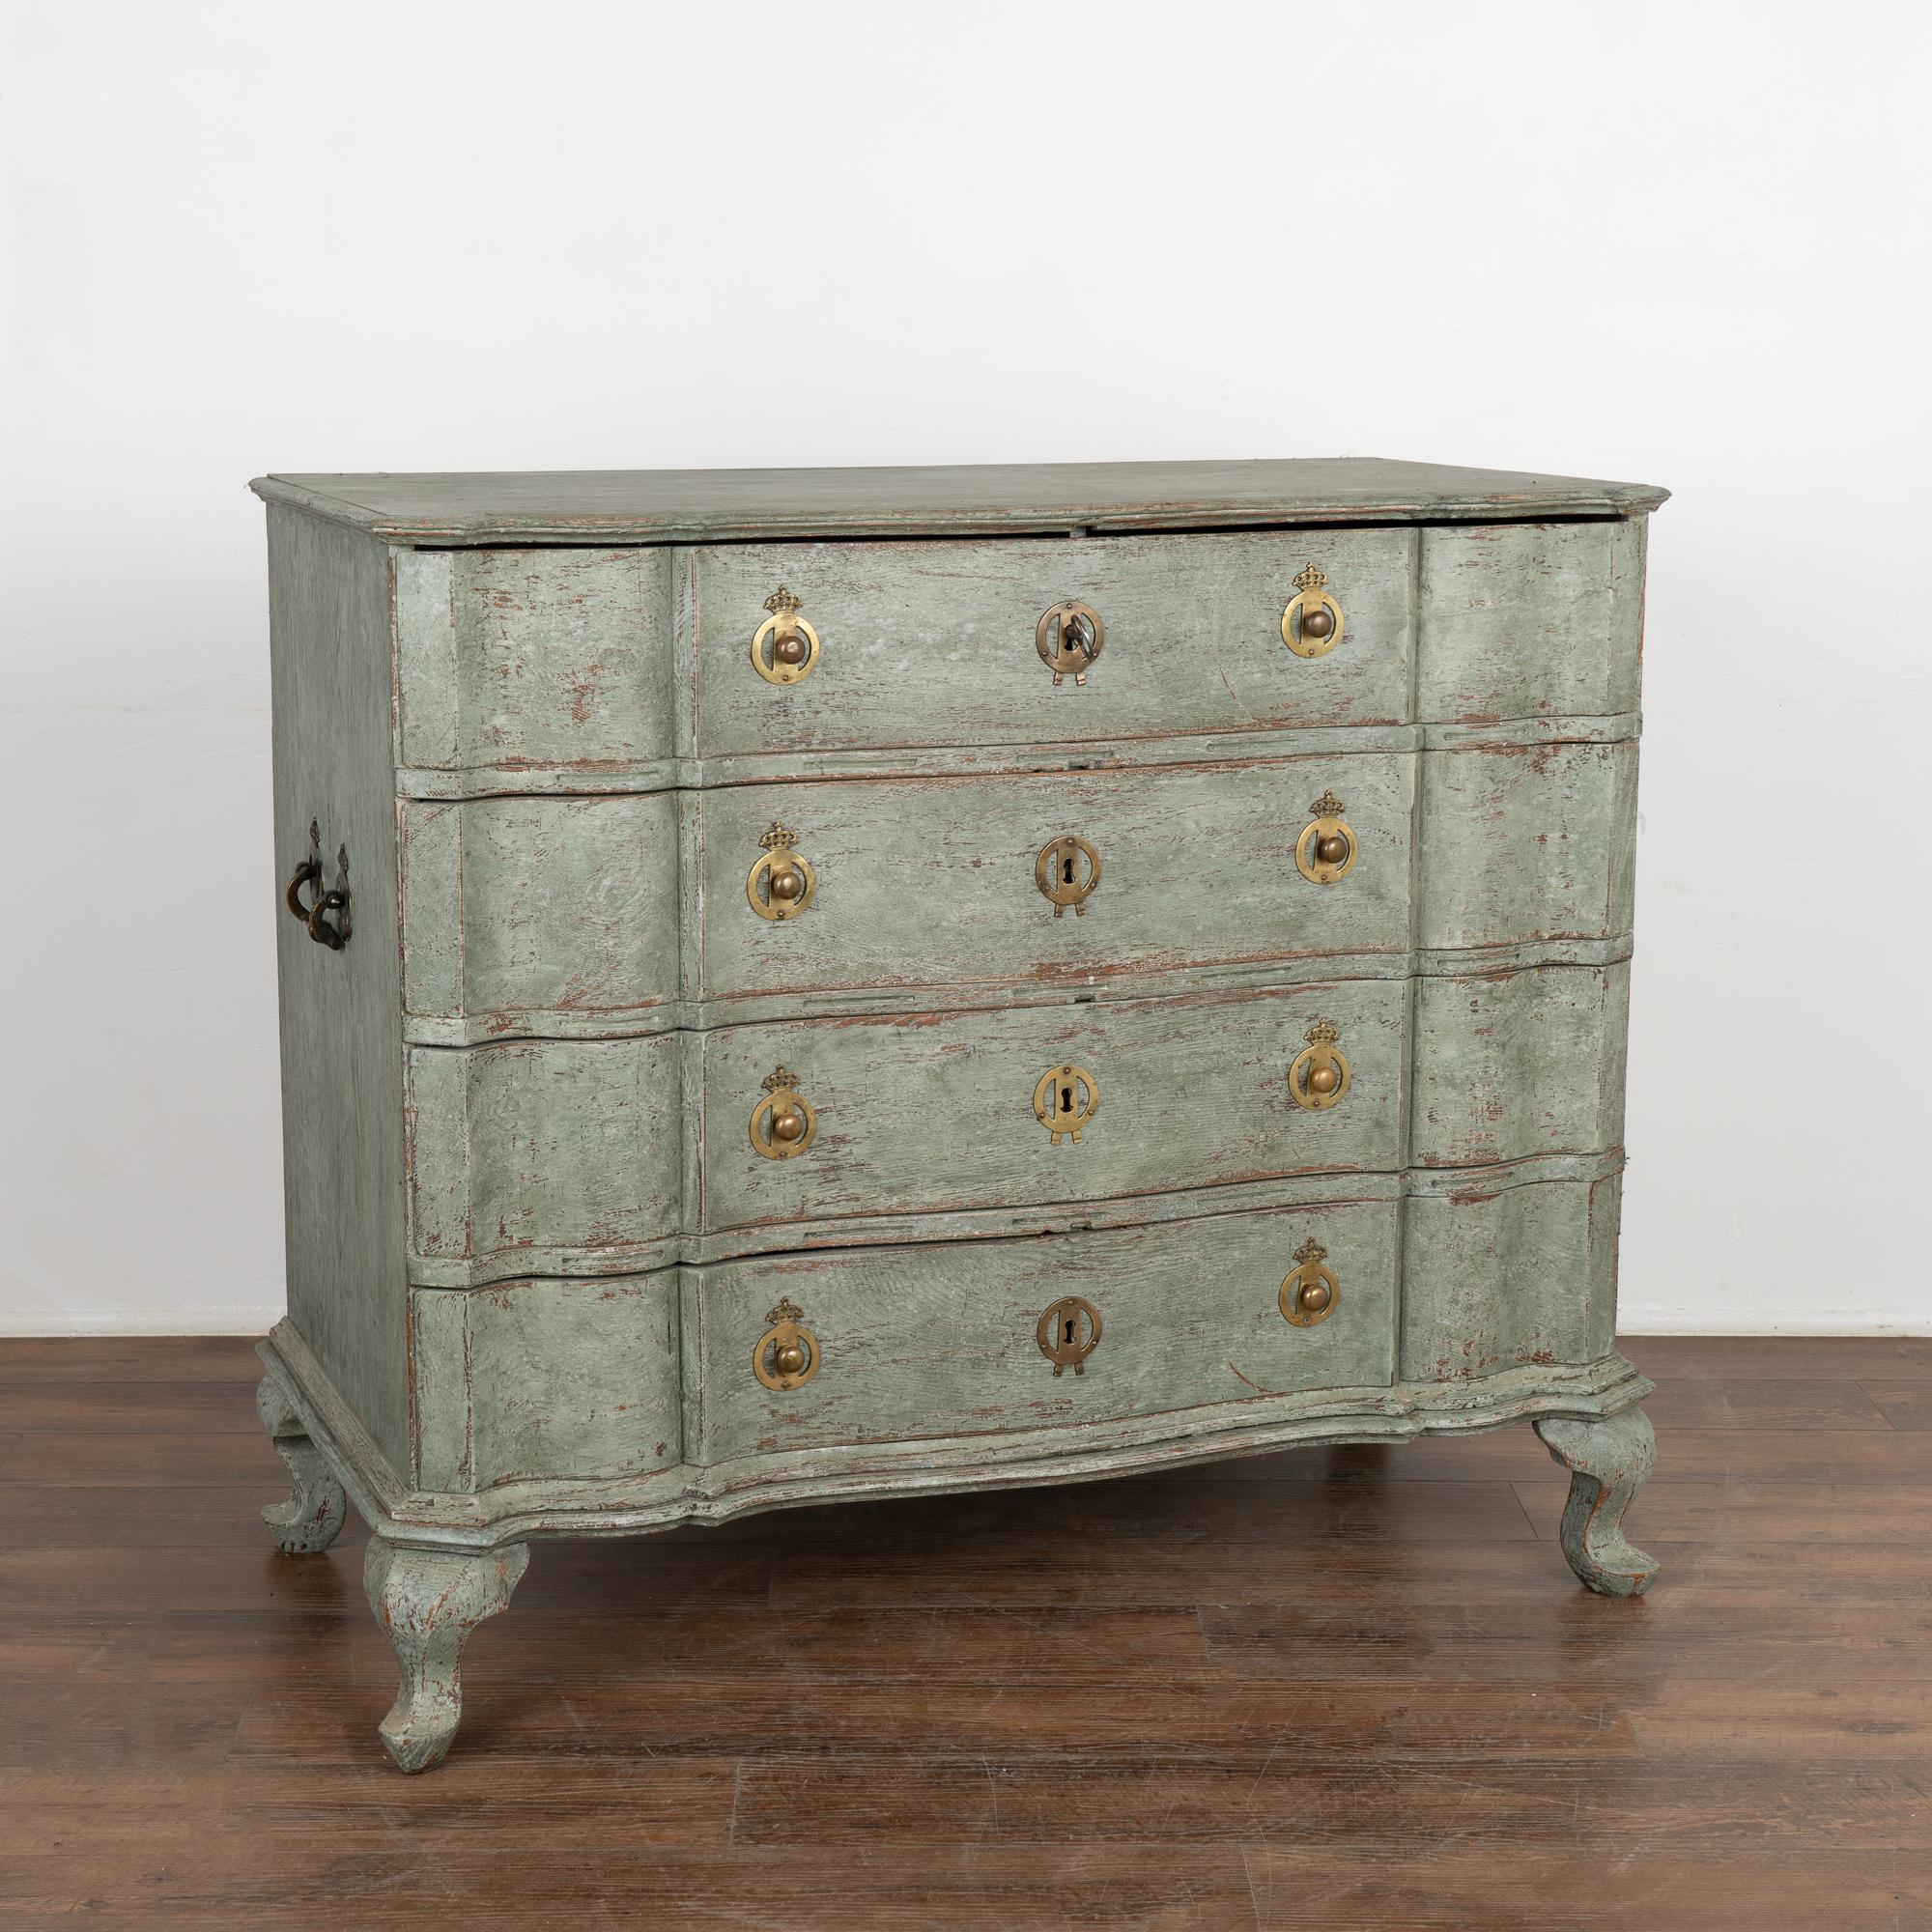 This large antique rococo oak chest of drawers features a serpentine front, handsome brass hardware pulls and rests on cabriolet feet.
It has been given an exceptional new professional seafoam green layered painted finish and has been lightly